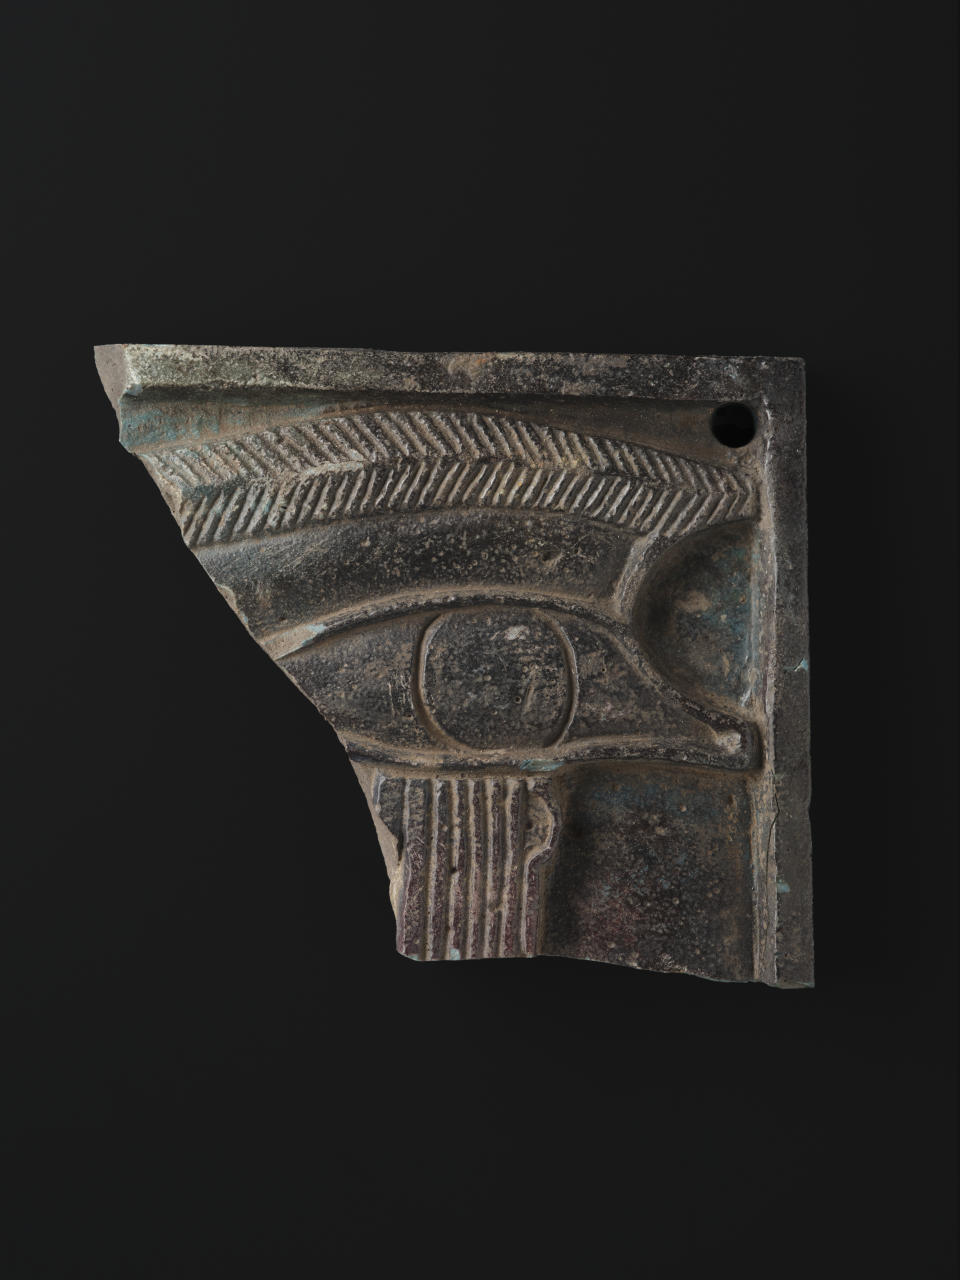 Fragment of a faience plaque depicting the Eye of Horus, Late or Ptolemaic Period (about 664-30 BC) (National Museums Scotland)